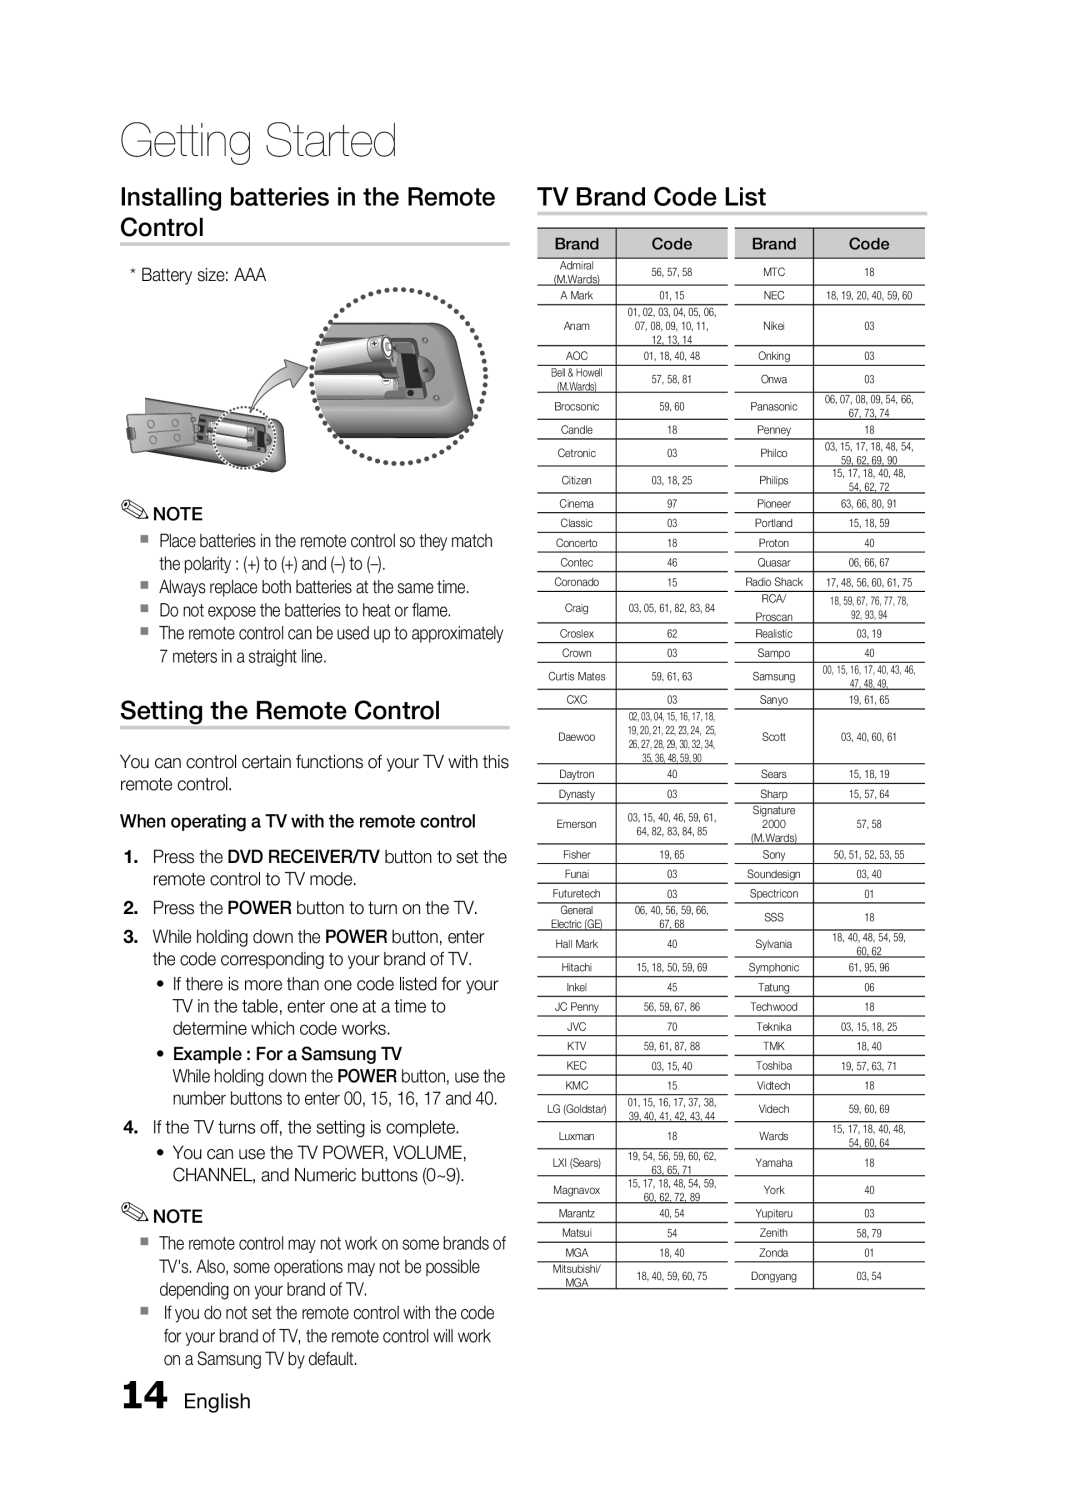 Samsung AH68-02269K Installing batteries in the Remote Control, TV Brand Code List, Setting the Remote Control, English 